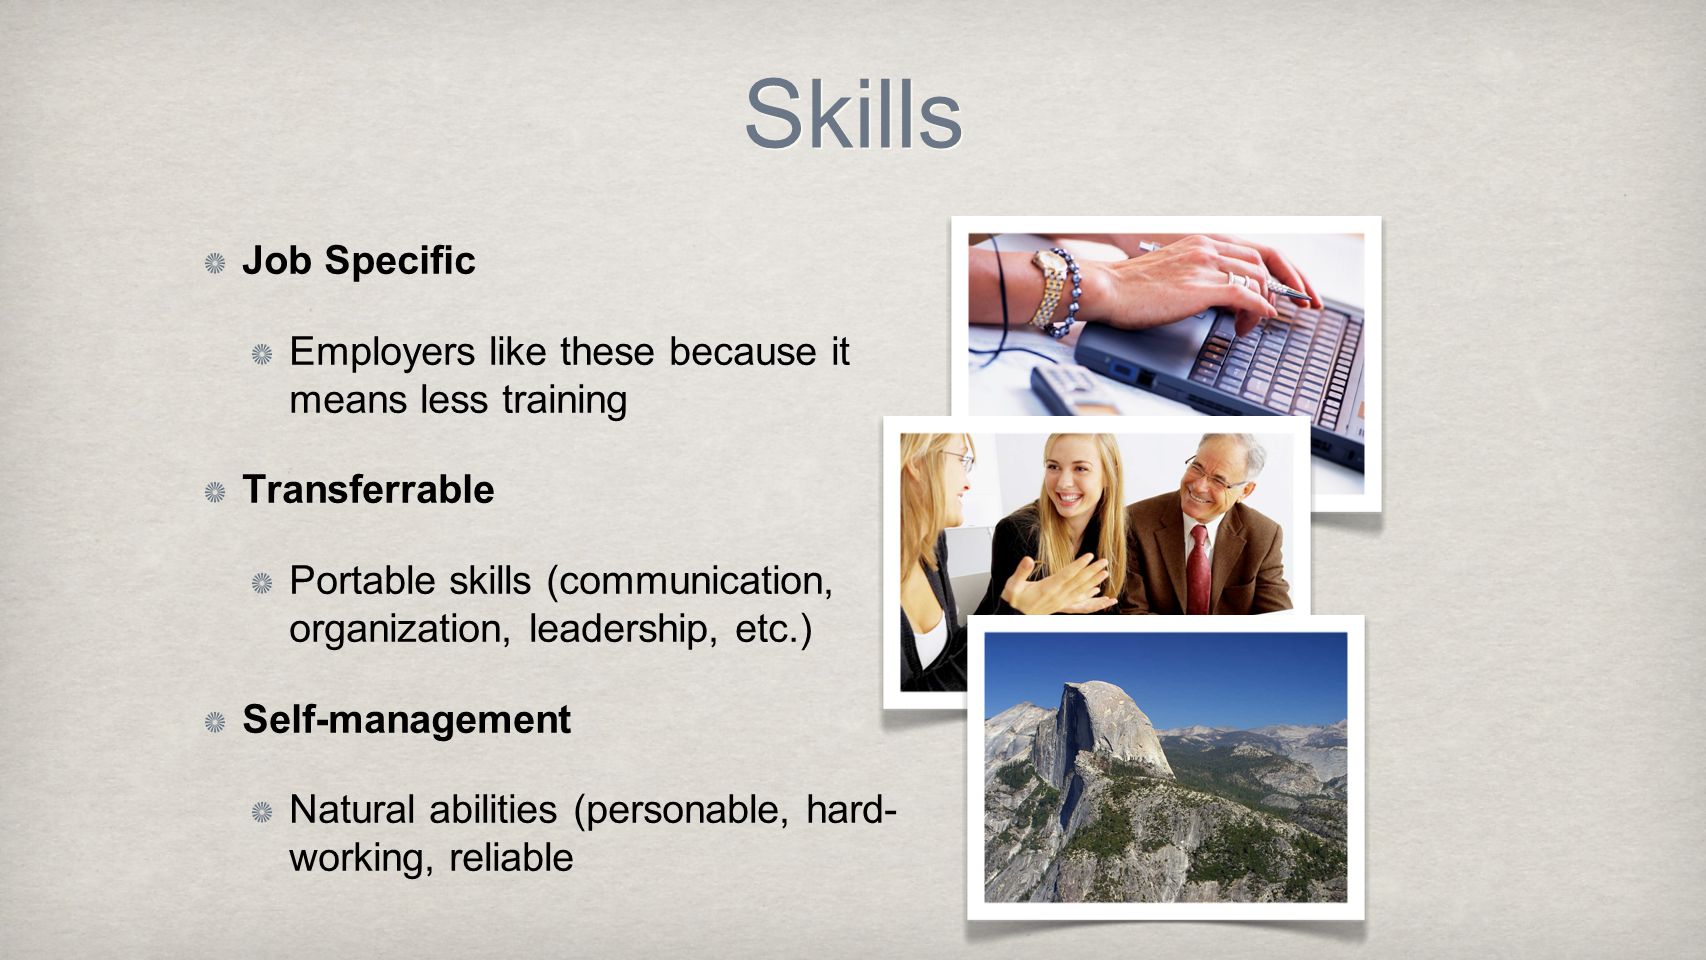 Skills Job Specific Employers like these because it means less training Transferrable Portable skills (communication, organization, leadership, etc.) Self-management Natural abilities (personable, hard- working, reliable